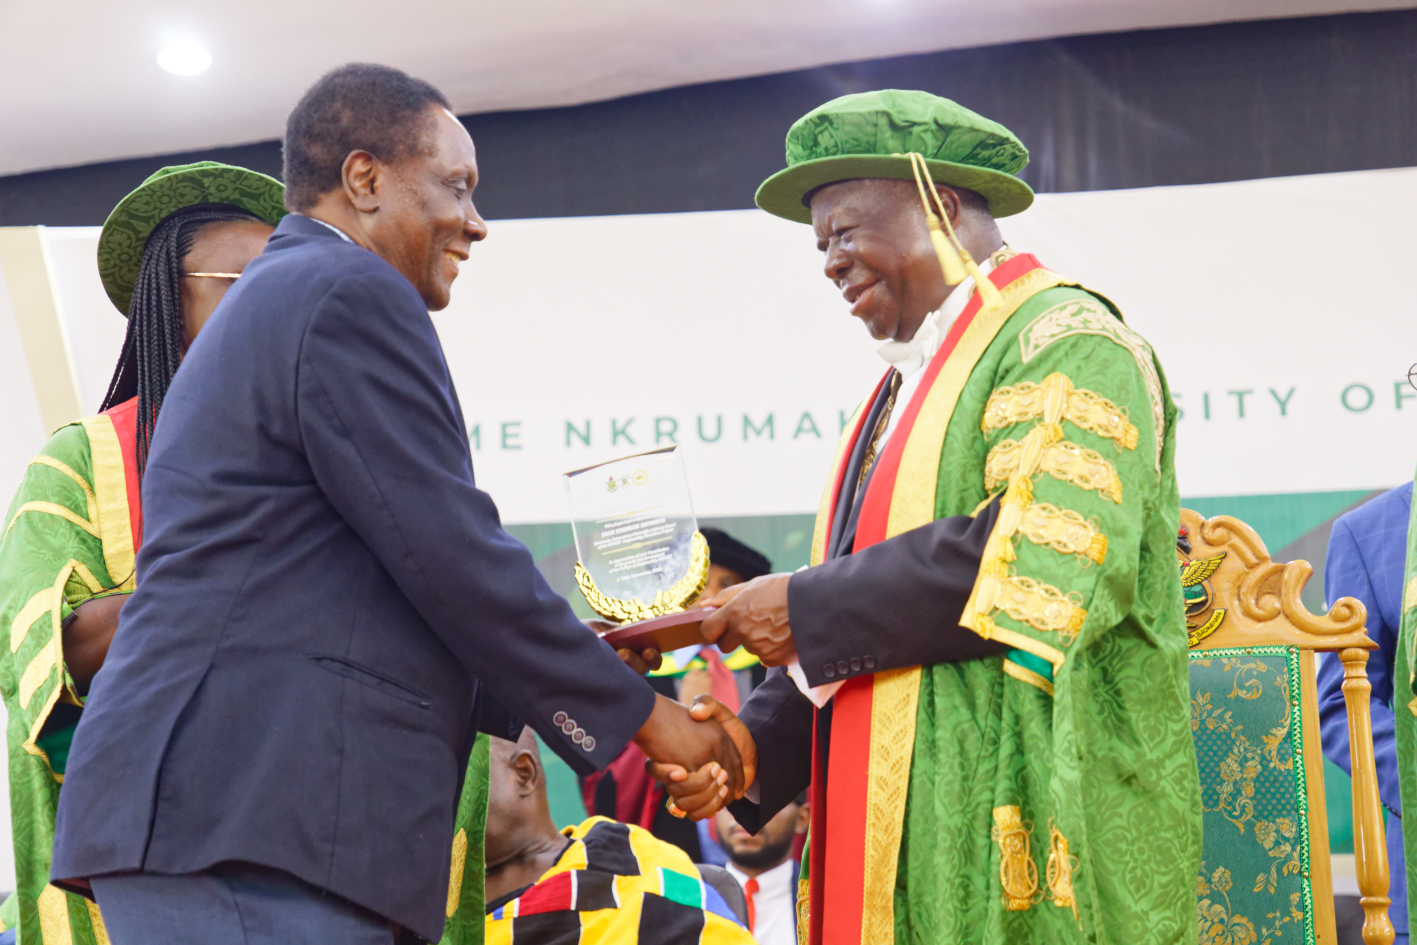 Prof. Johnson Asumadu, Chairman, International Scientific Advisory Board, KEEP, received a plaque from His Excellency Otumfuo Osei Tutu II for his outstanding service to KEEP